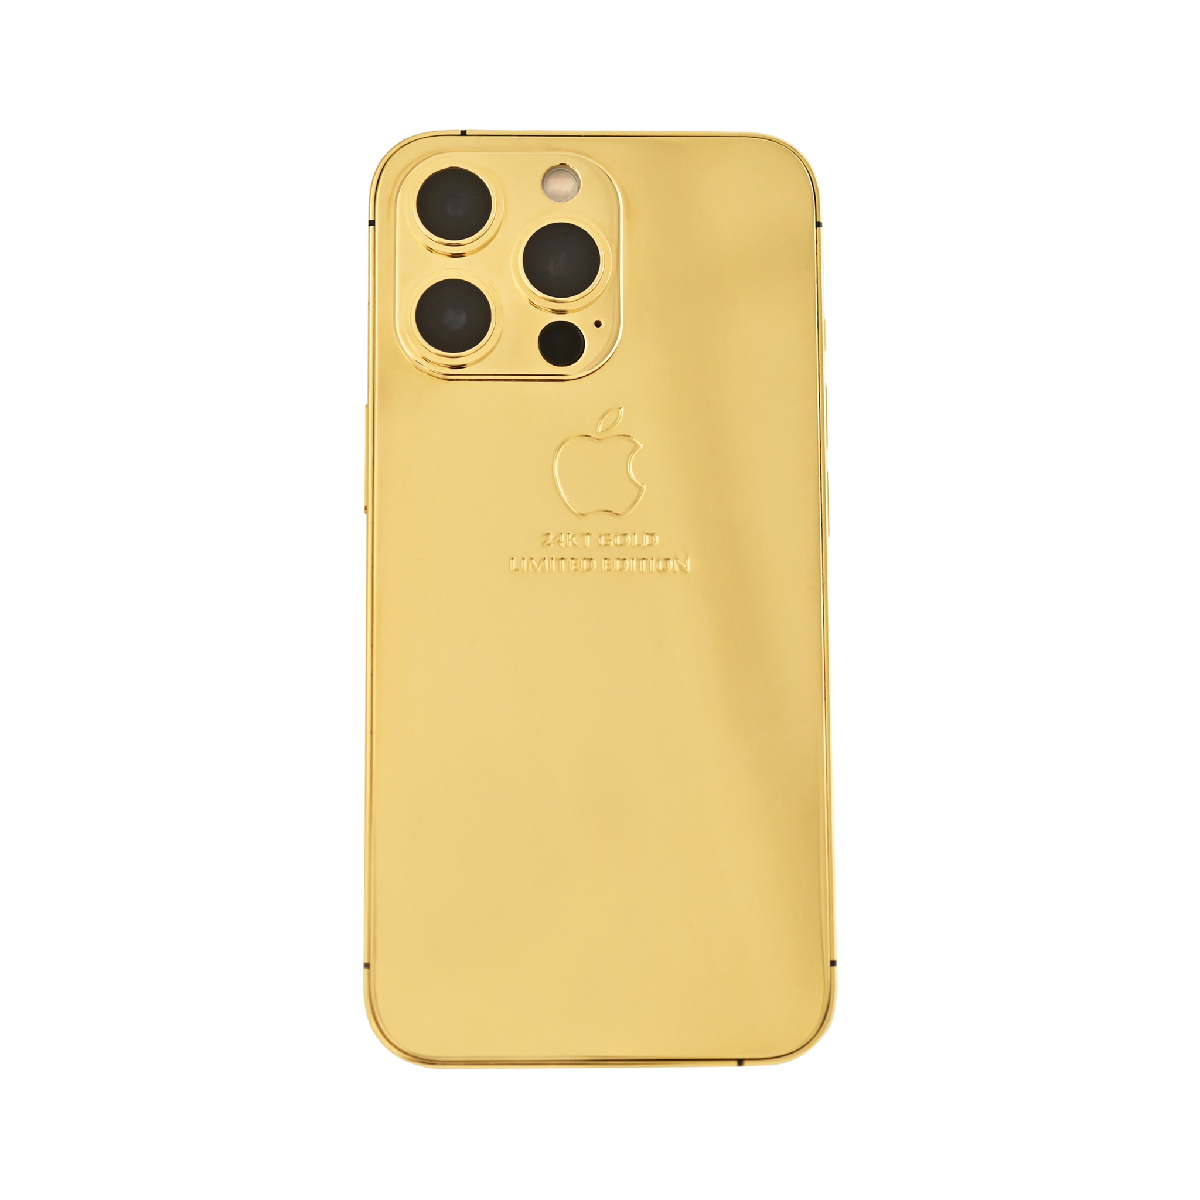 Caviar iPhone 13 Pro 24K Full Gold Limited Edition 1TB